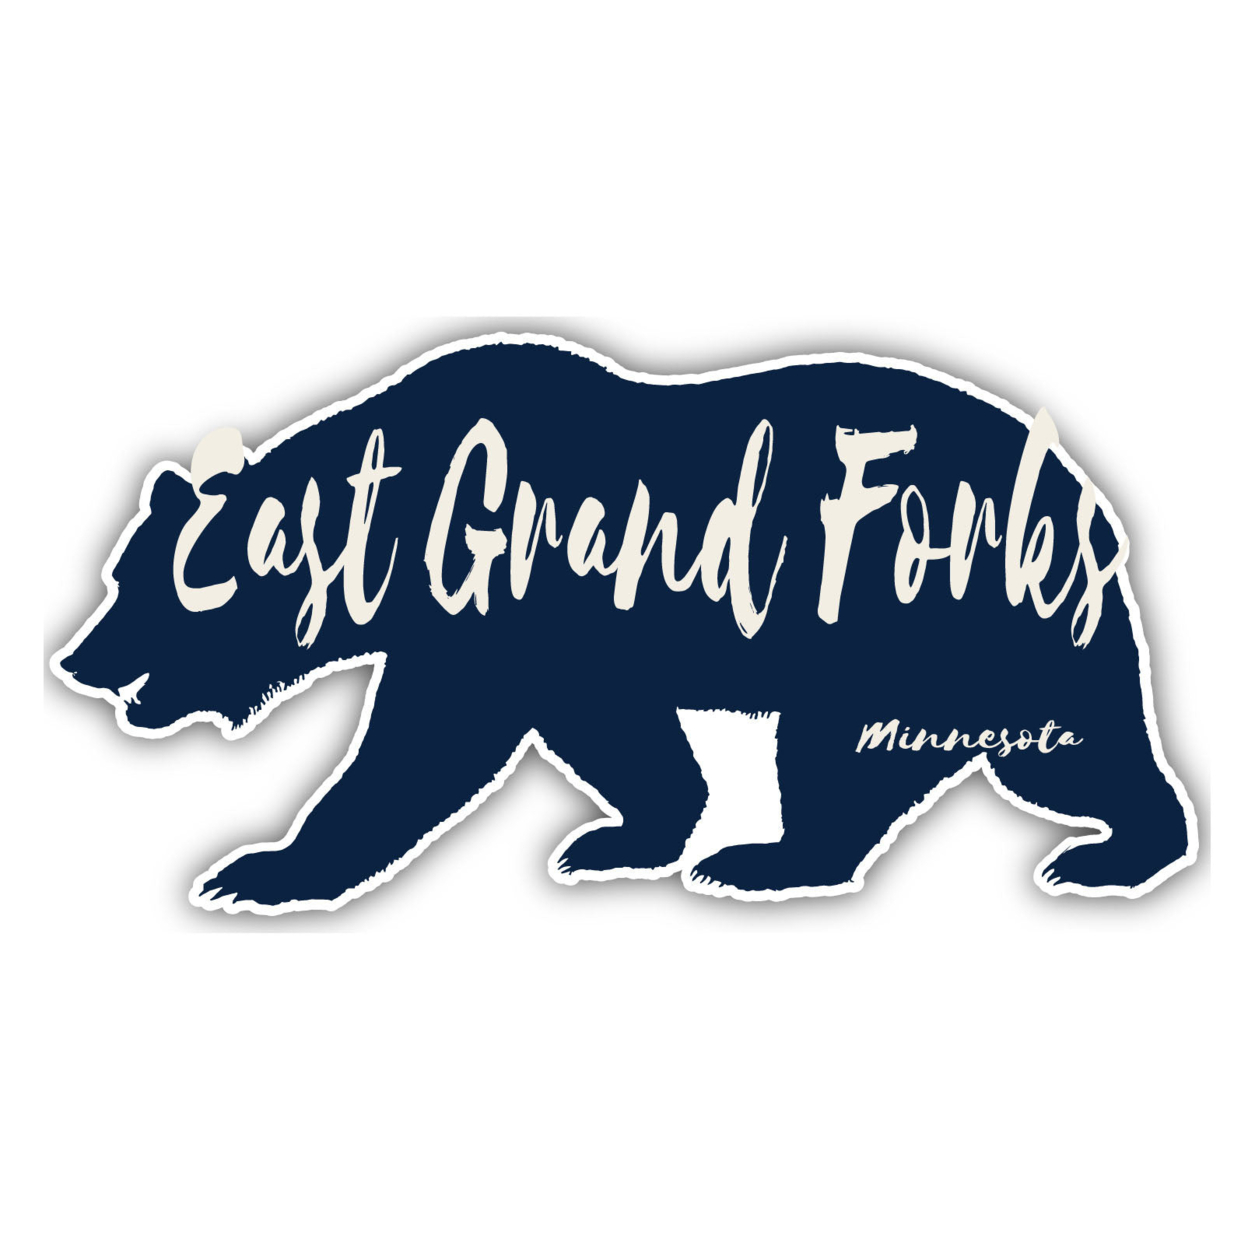 East Grand Forks Minnesota Souvenir Decorative Stickers (Choose Theme And Size) - 4-Pack, 4-Inch, Bear